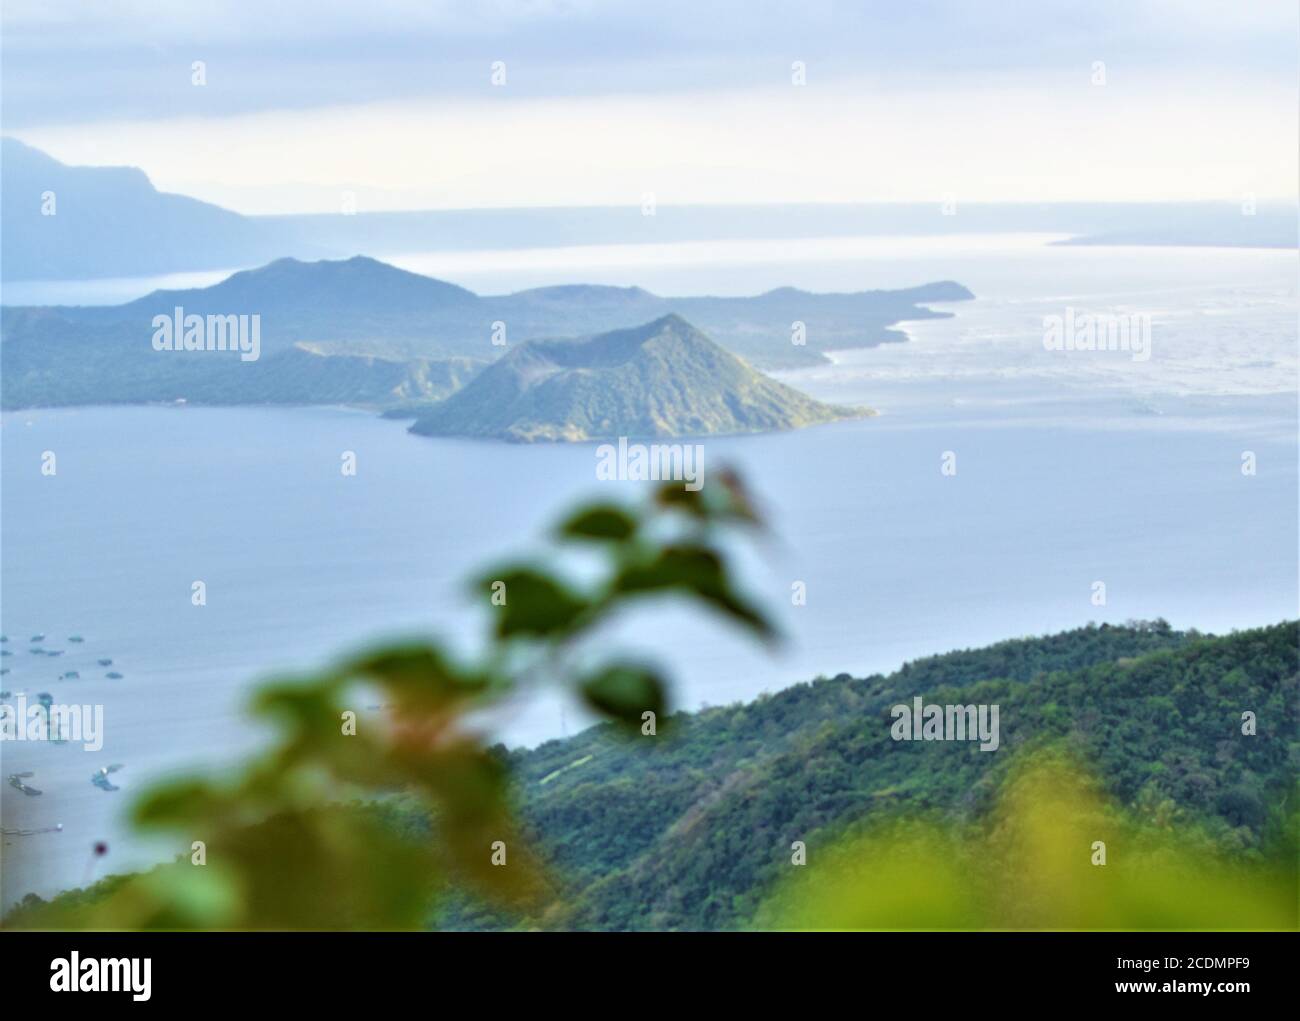 A view of the beautiful Taal volcano in the Philippines Stock Photo